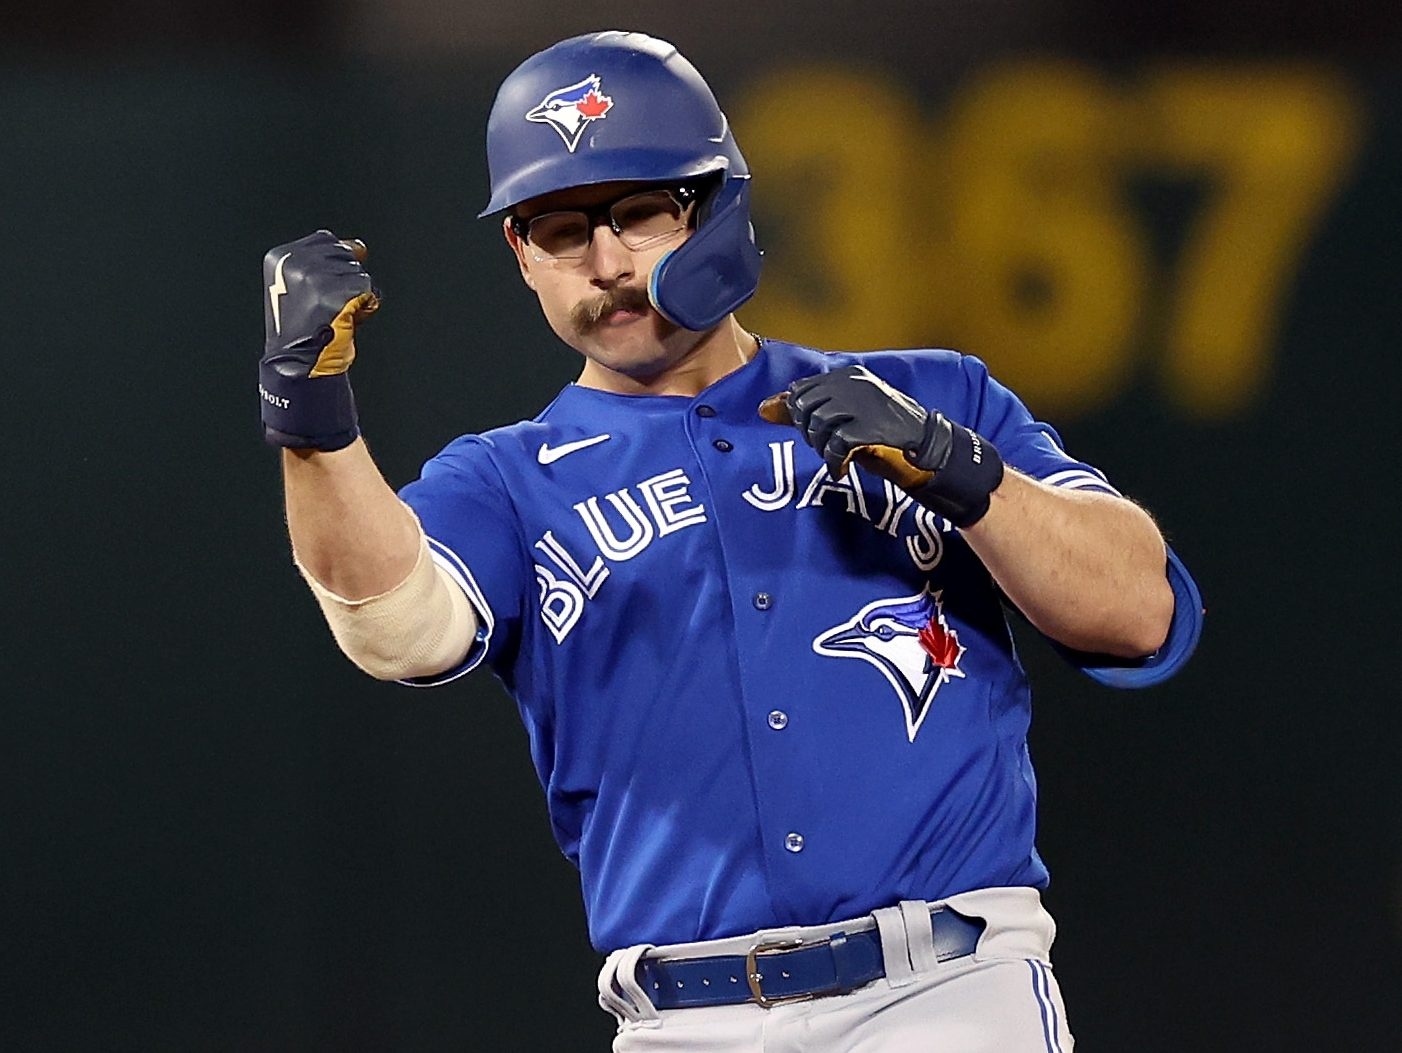 Schneider's early Jays stats are almost too good to be believed